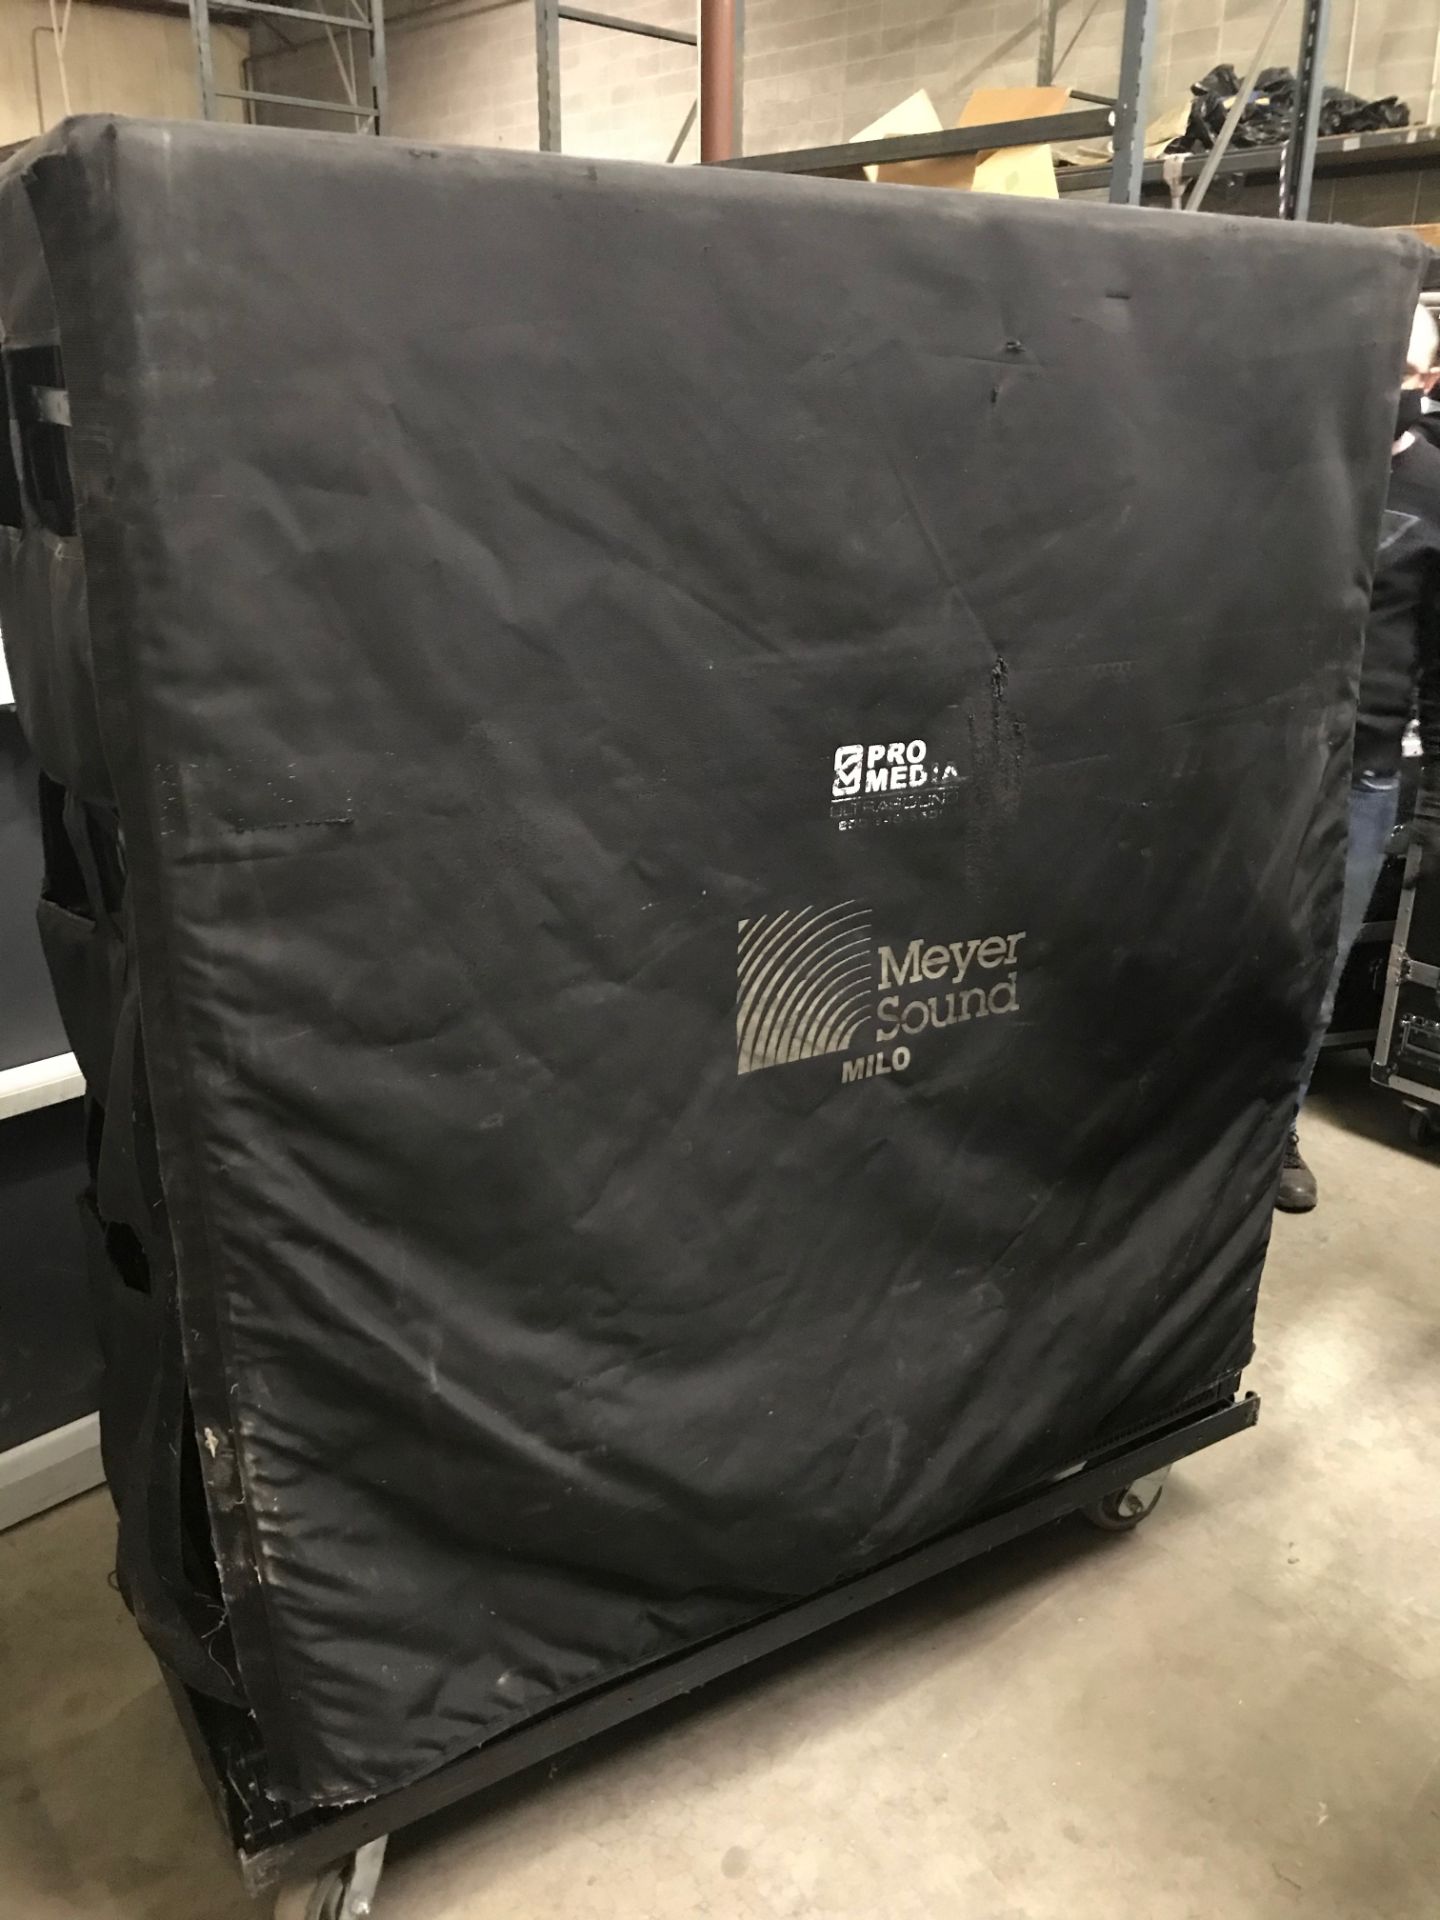 LOT OF: (4) MEYER SOUND, MILO HP MONITORS W/ ROLLING CART AND DUST COVER - Image 8 of 8